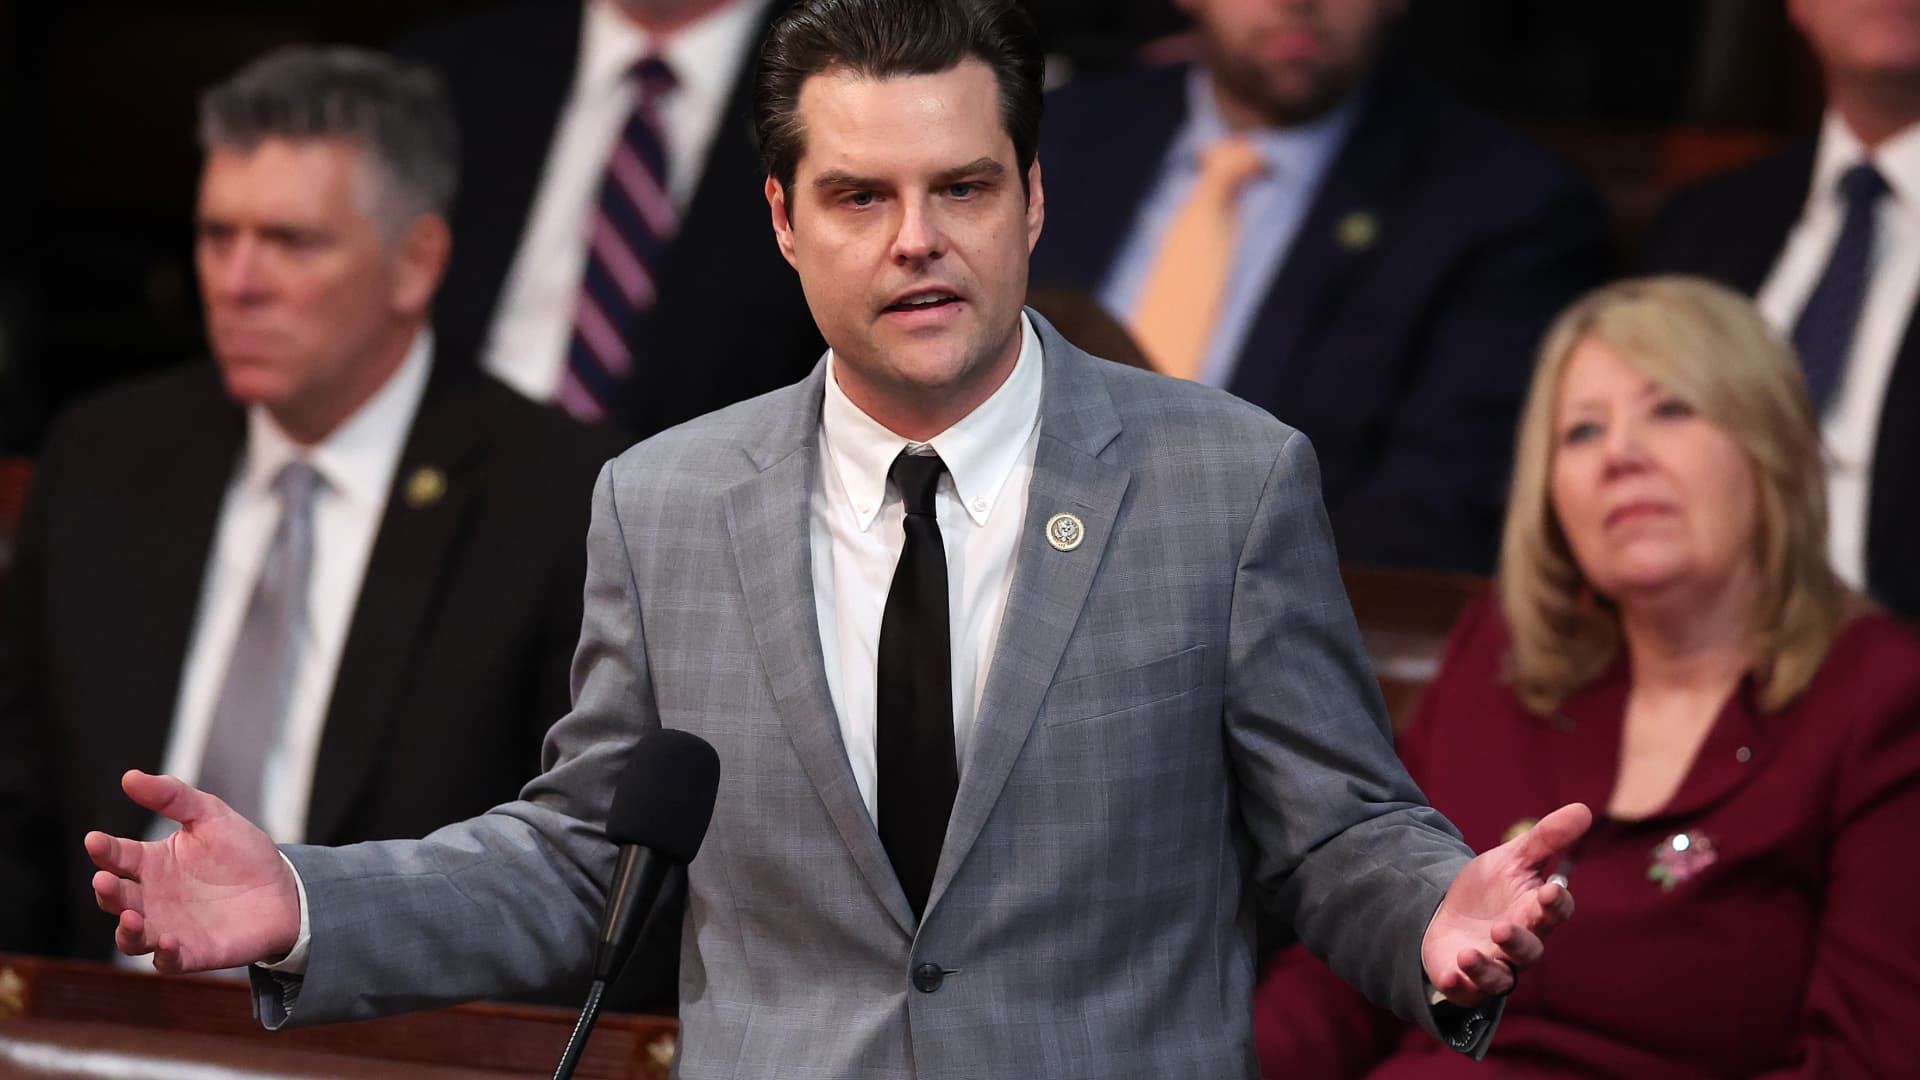 Lady arrested for allegedly throwing wine at Rep. Matt Gaetz